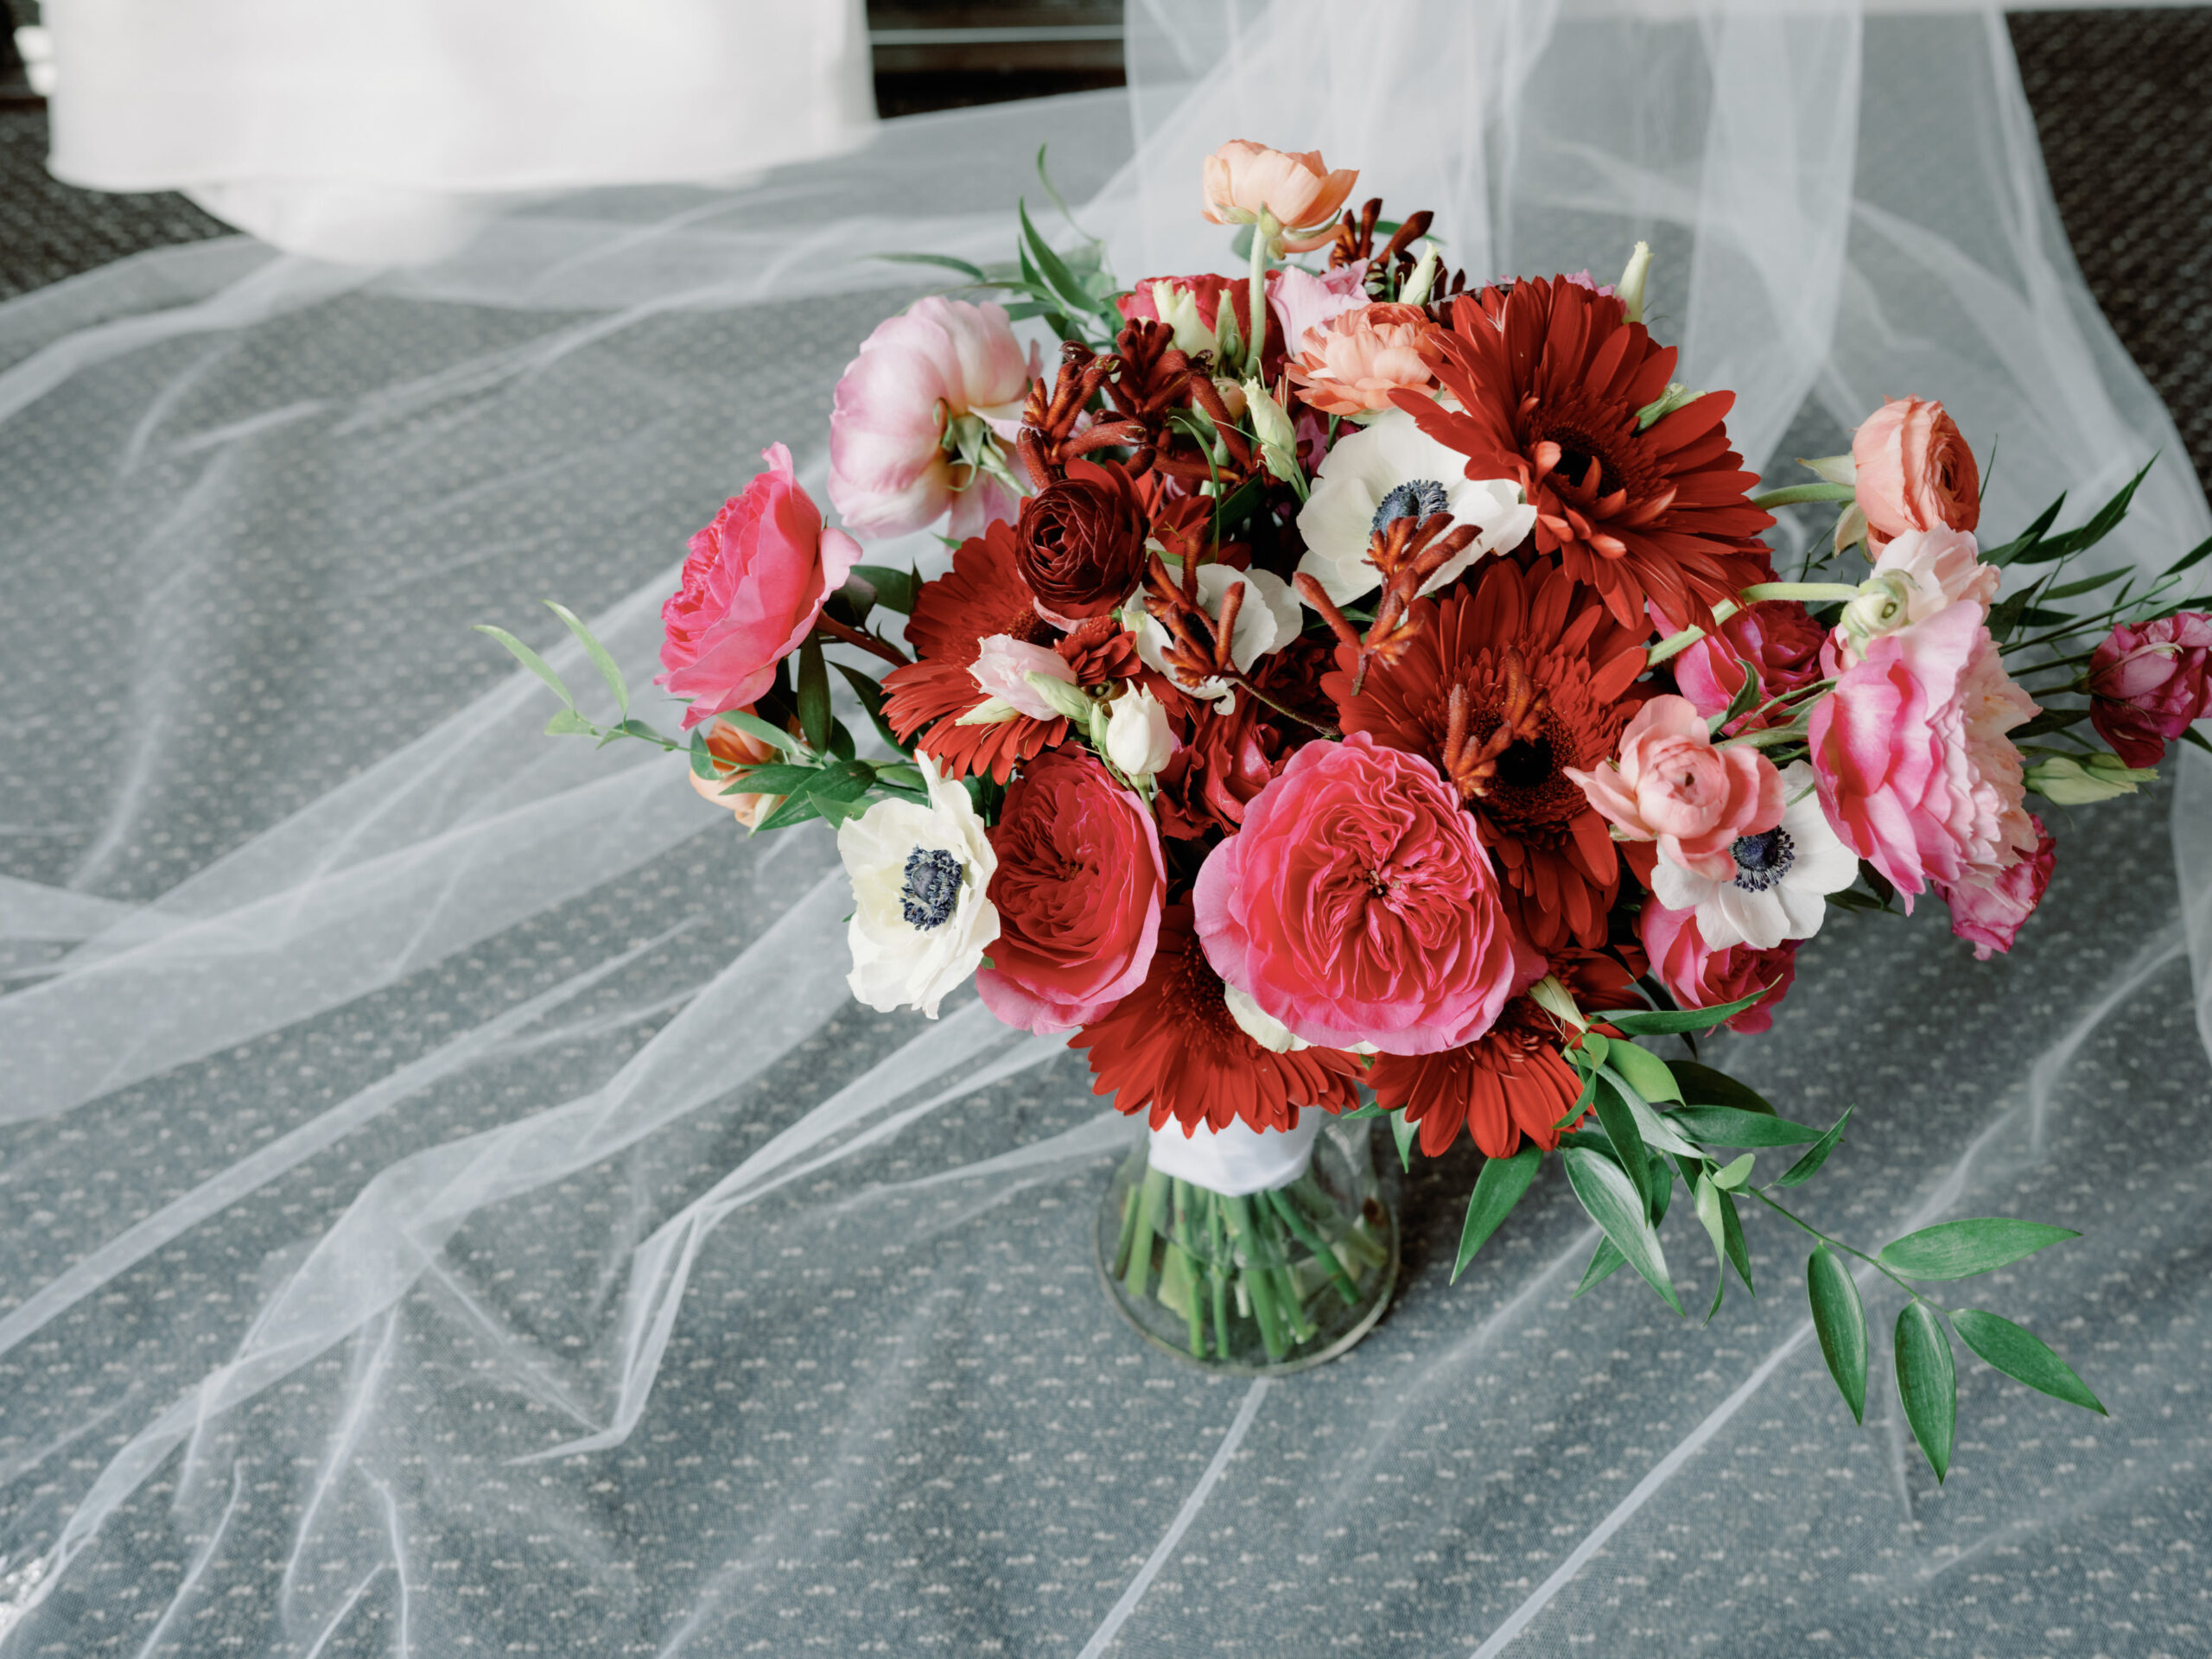 Beautiful Bridal Flower bouquet in red, pink and white shades. Image by Jenny Fu Studio